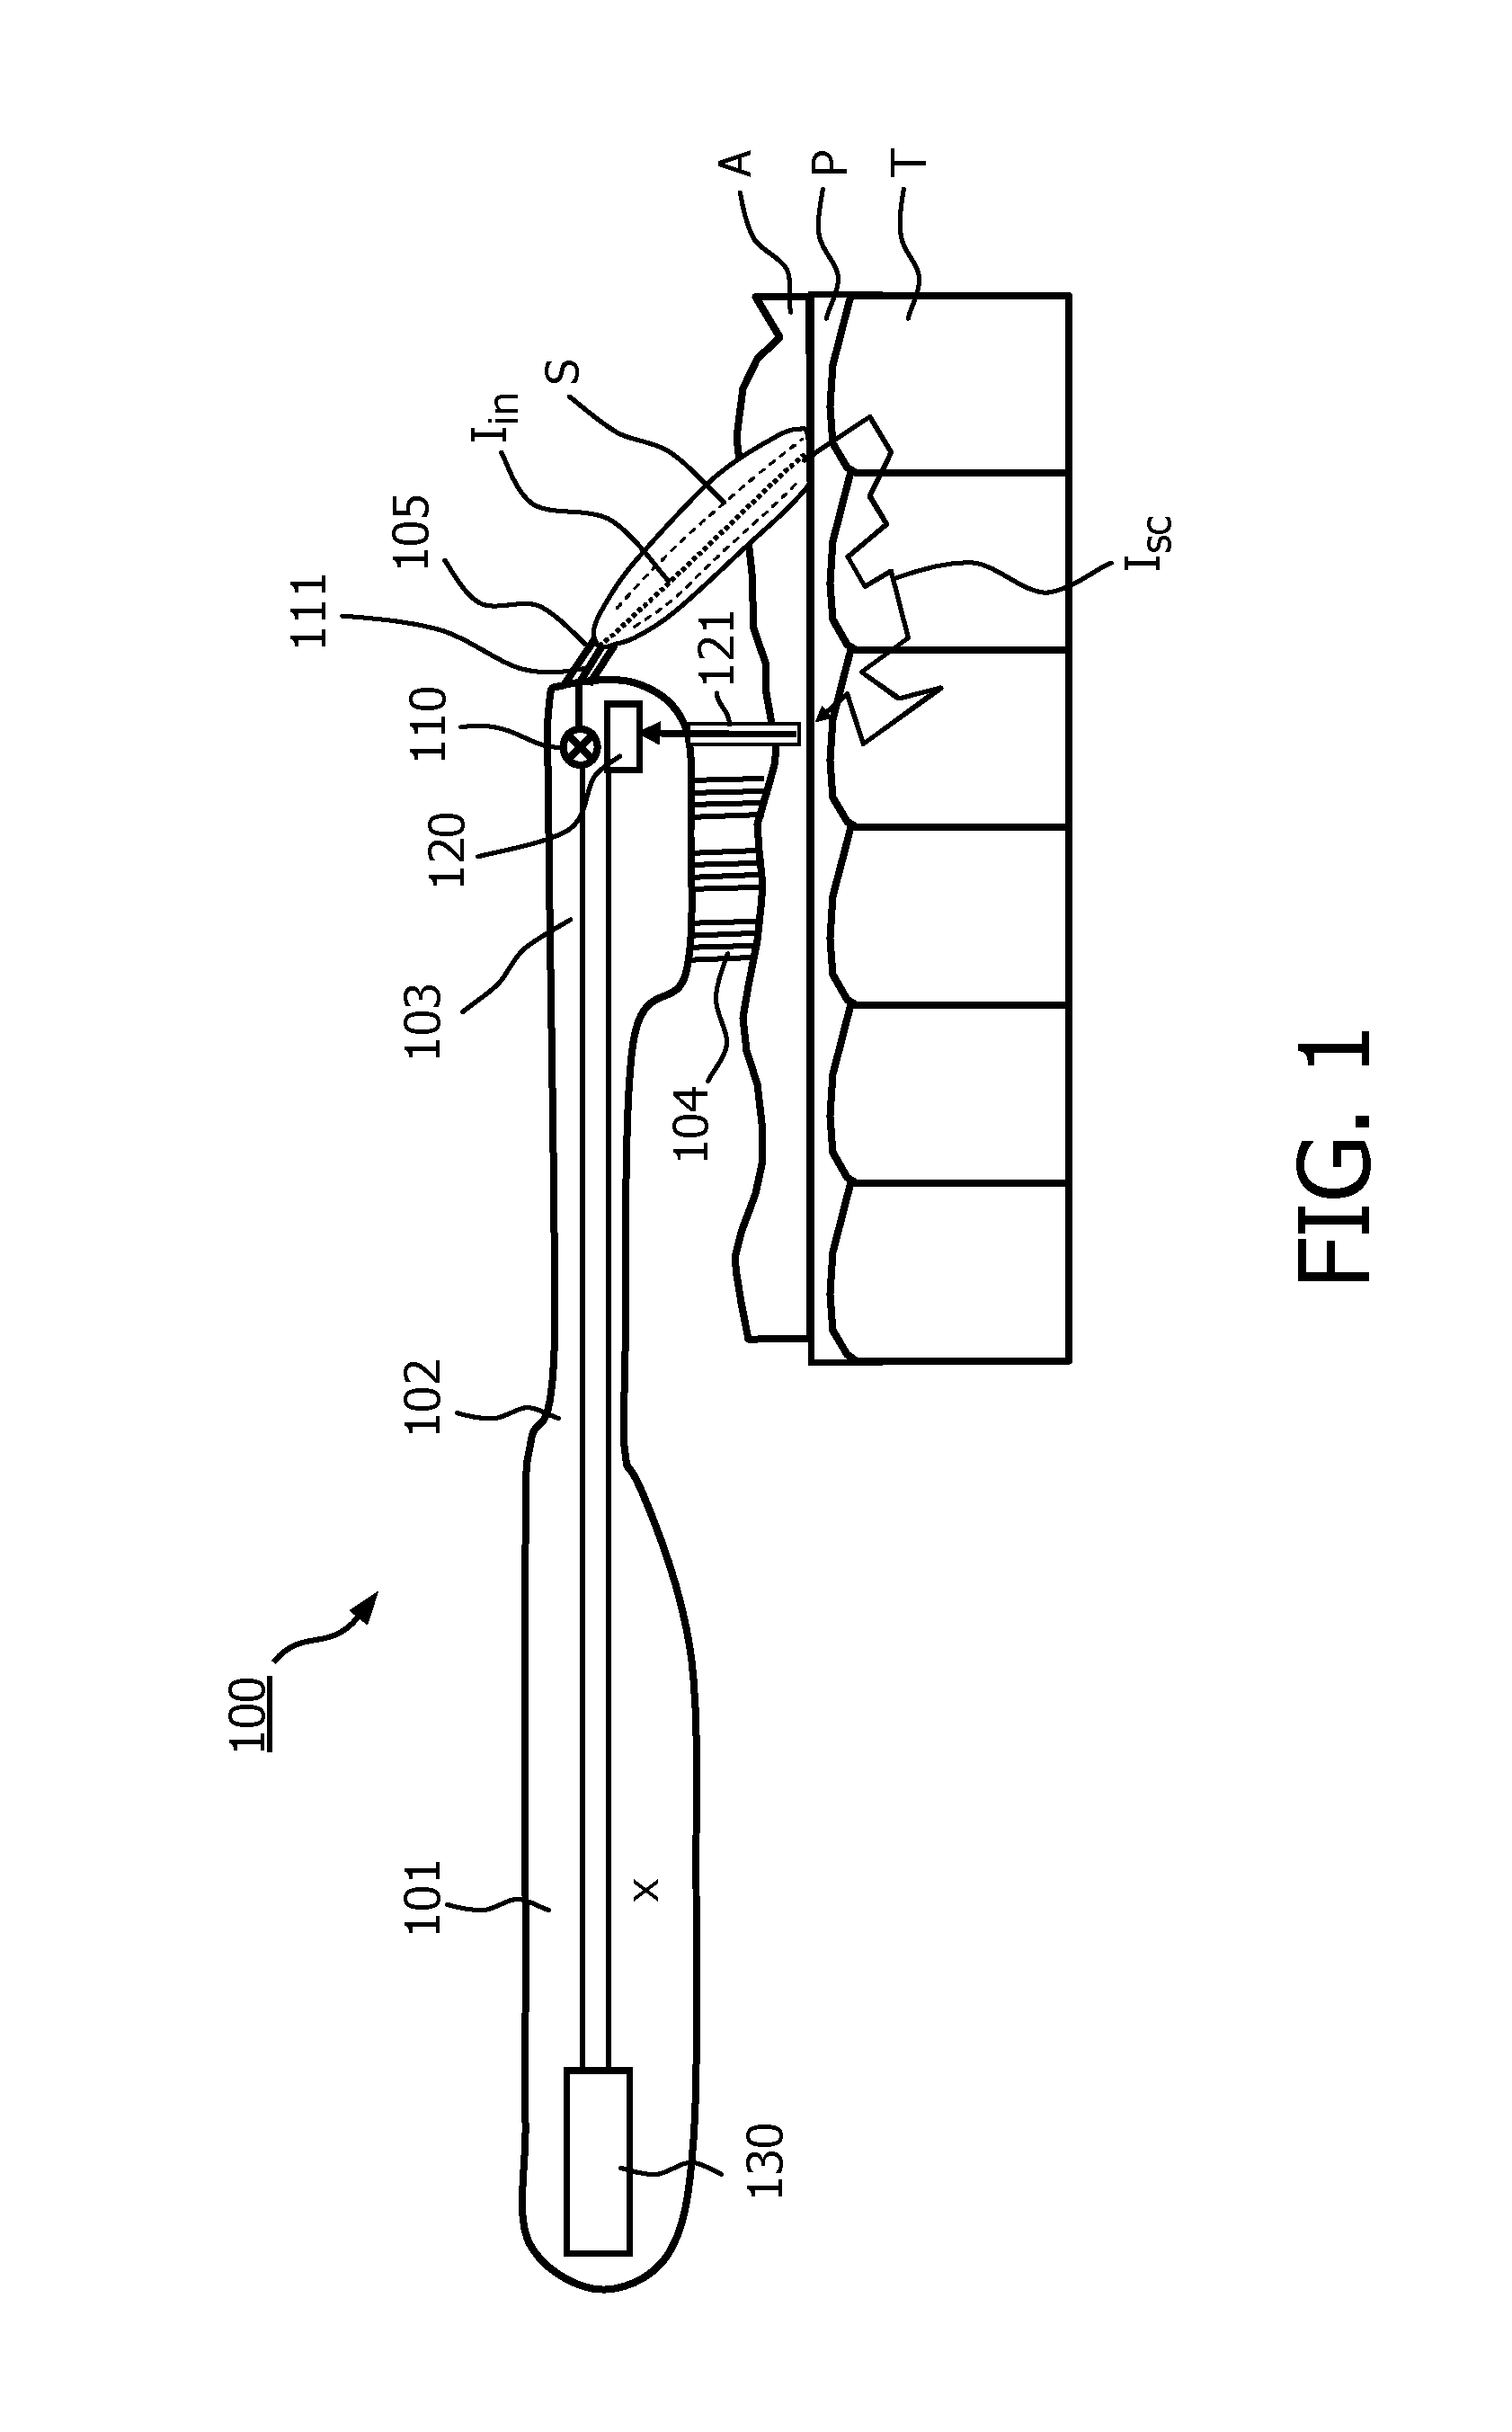 Device for dental plaque detection